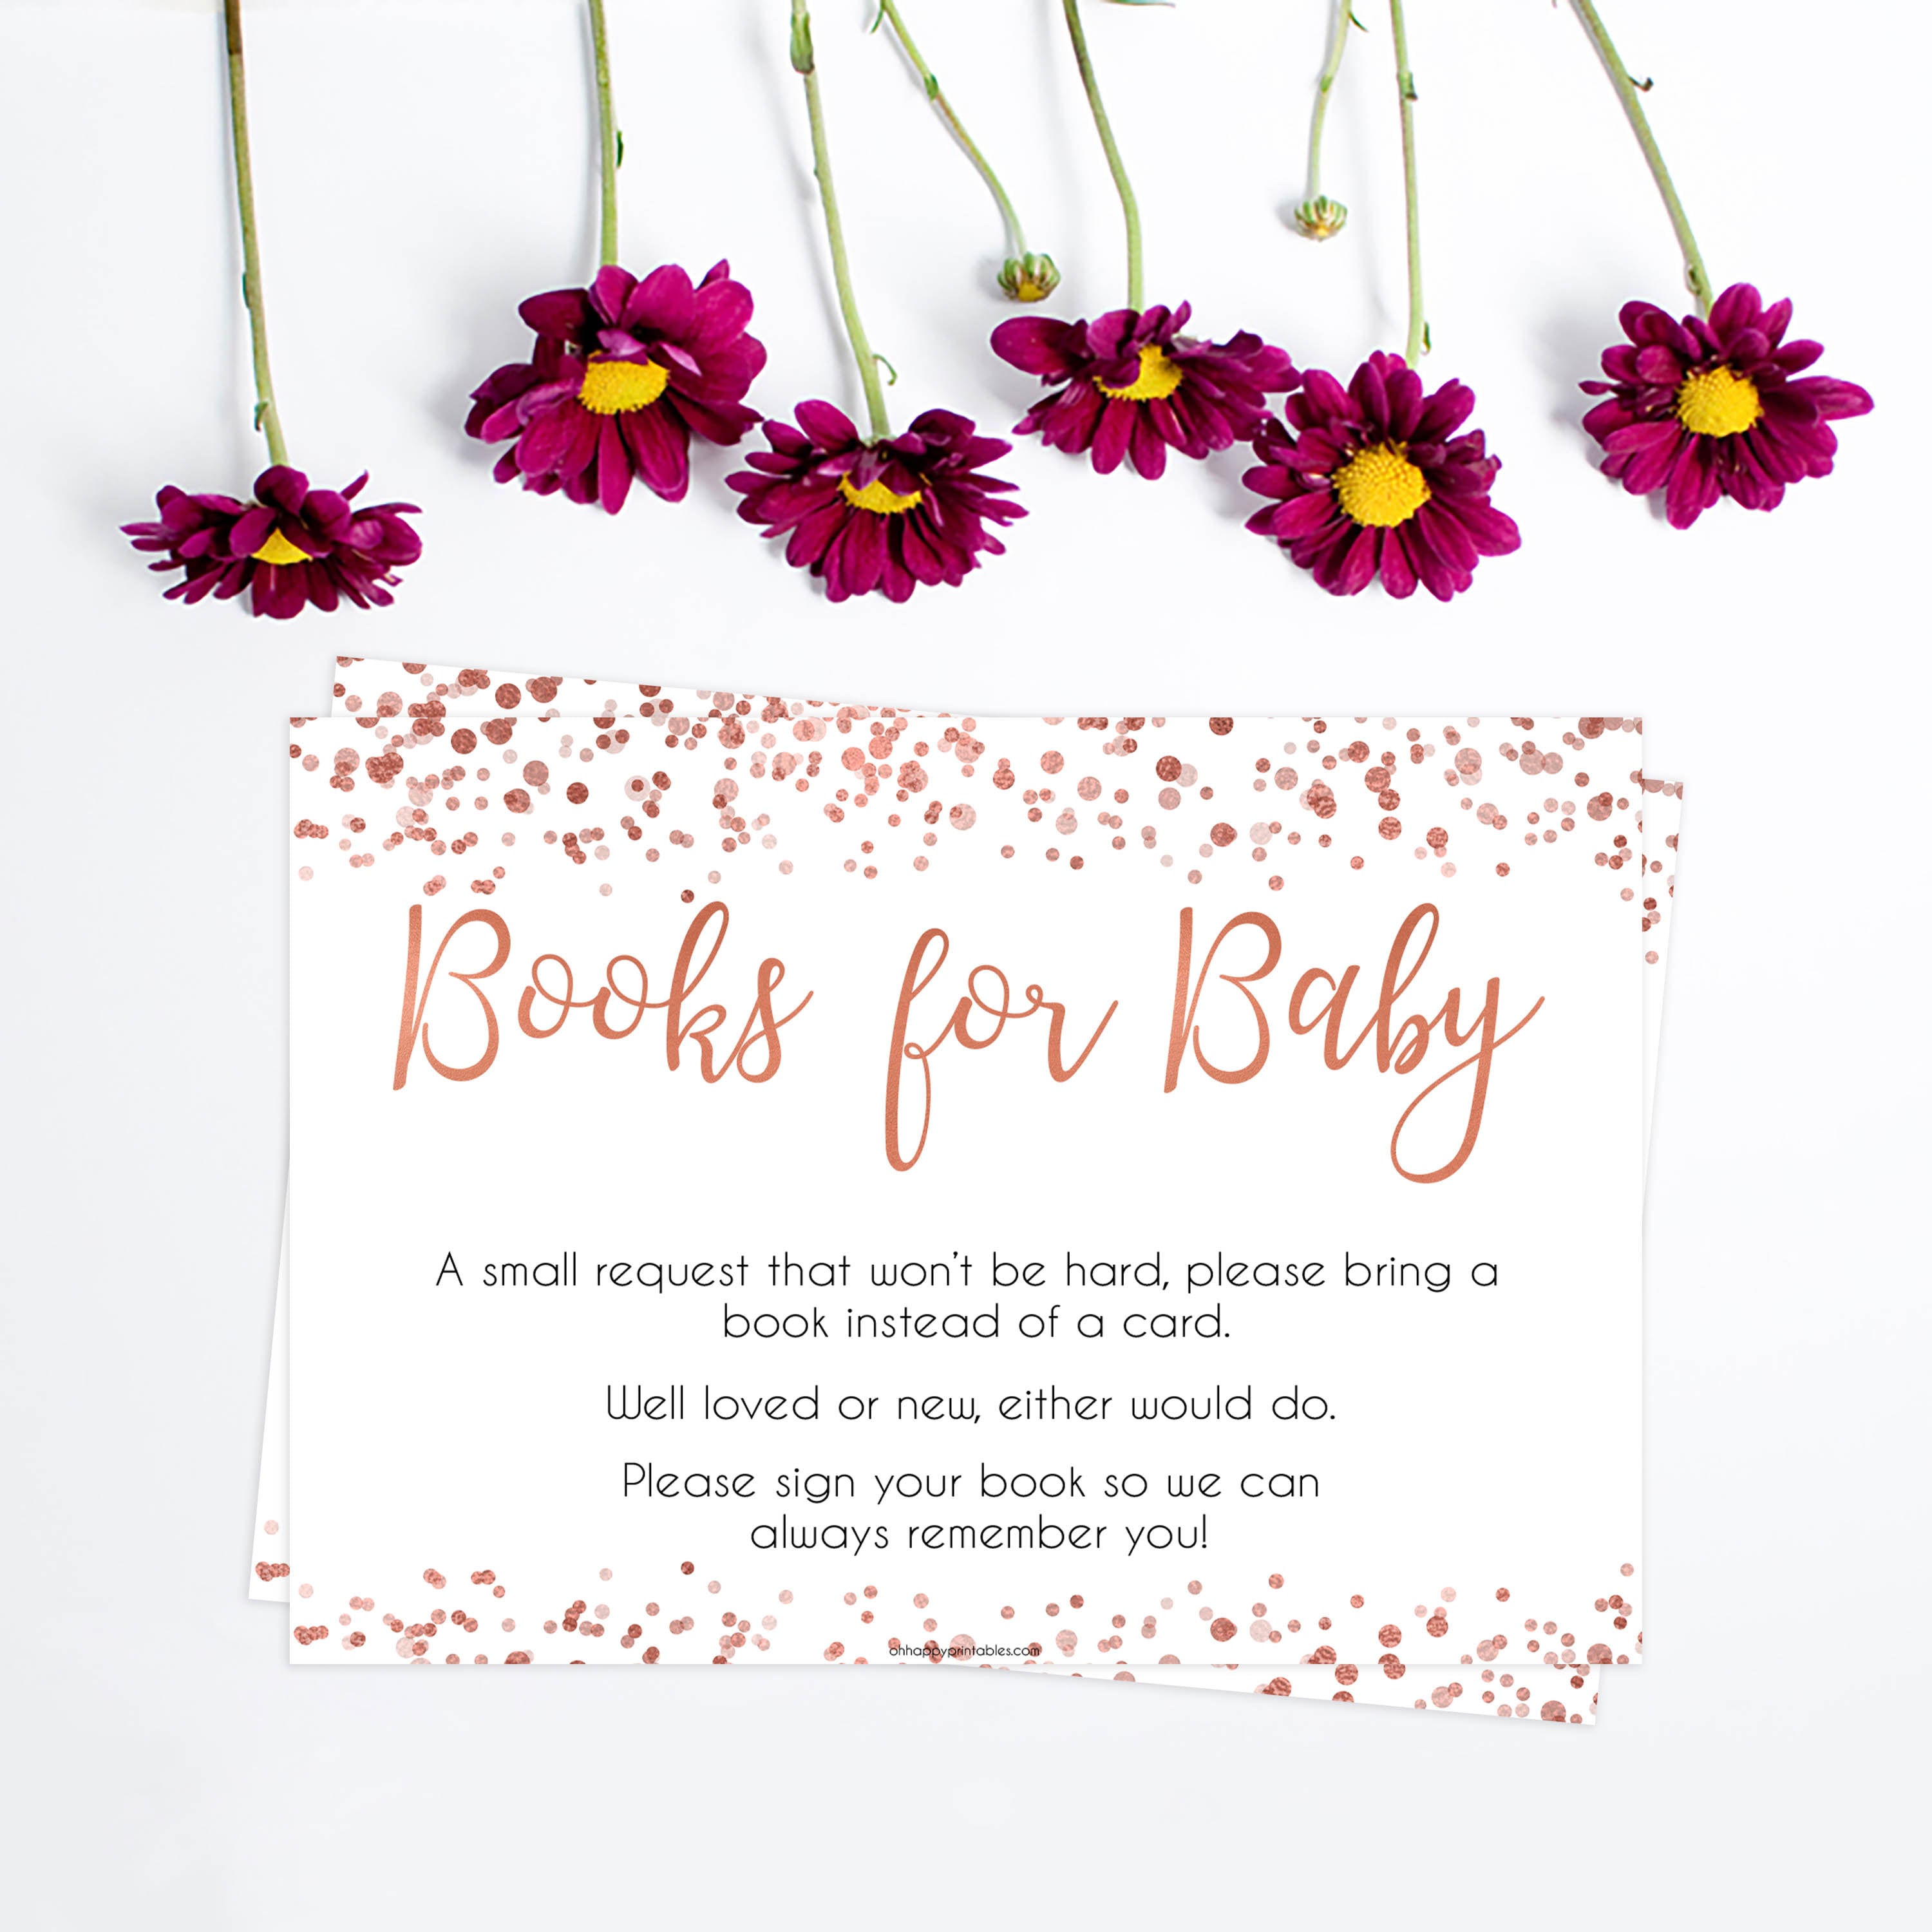 bring a book game, books for baby insert, Printable baby shower games, rose gold fun baby games, baby shower games, fun baby shower ideas, top baby shower ideas, blush baby shower, rose gold baby shower ideas